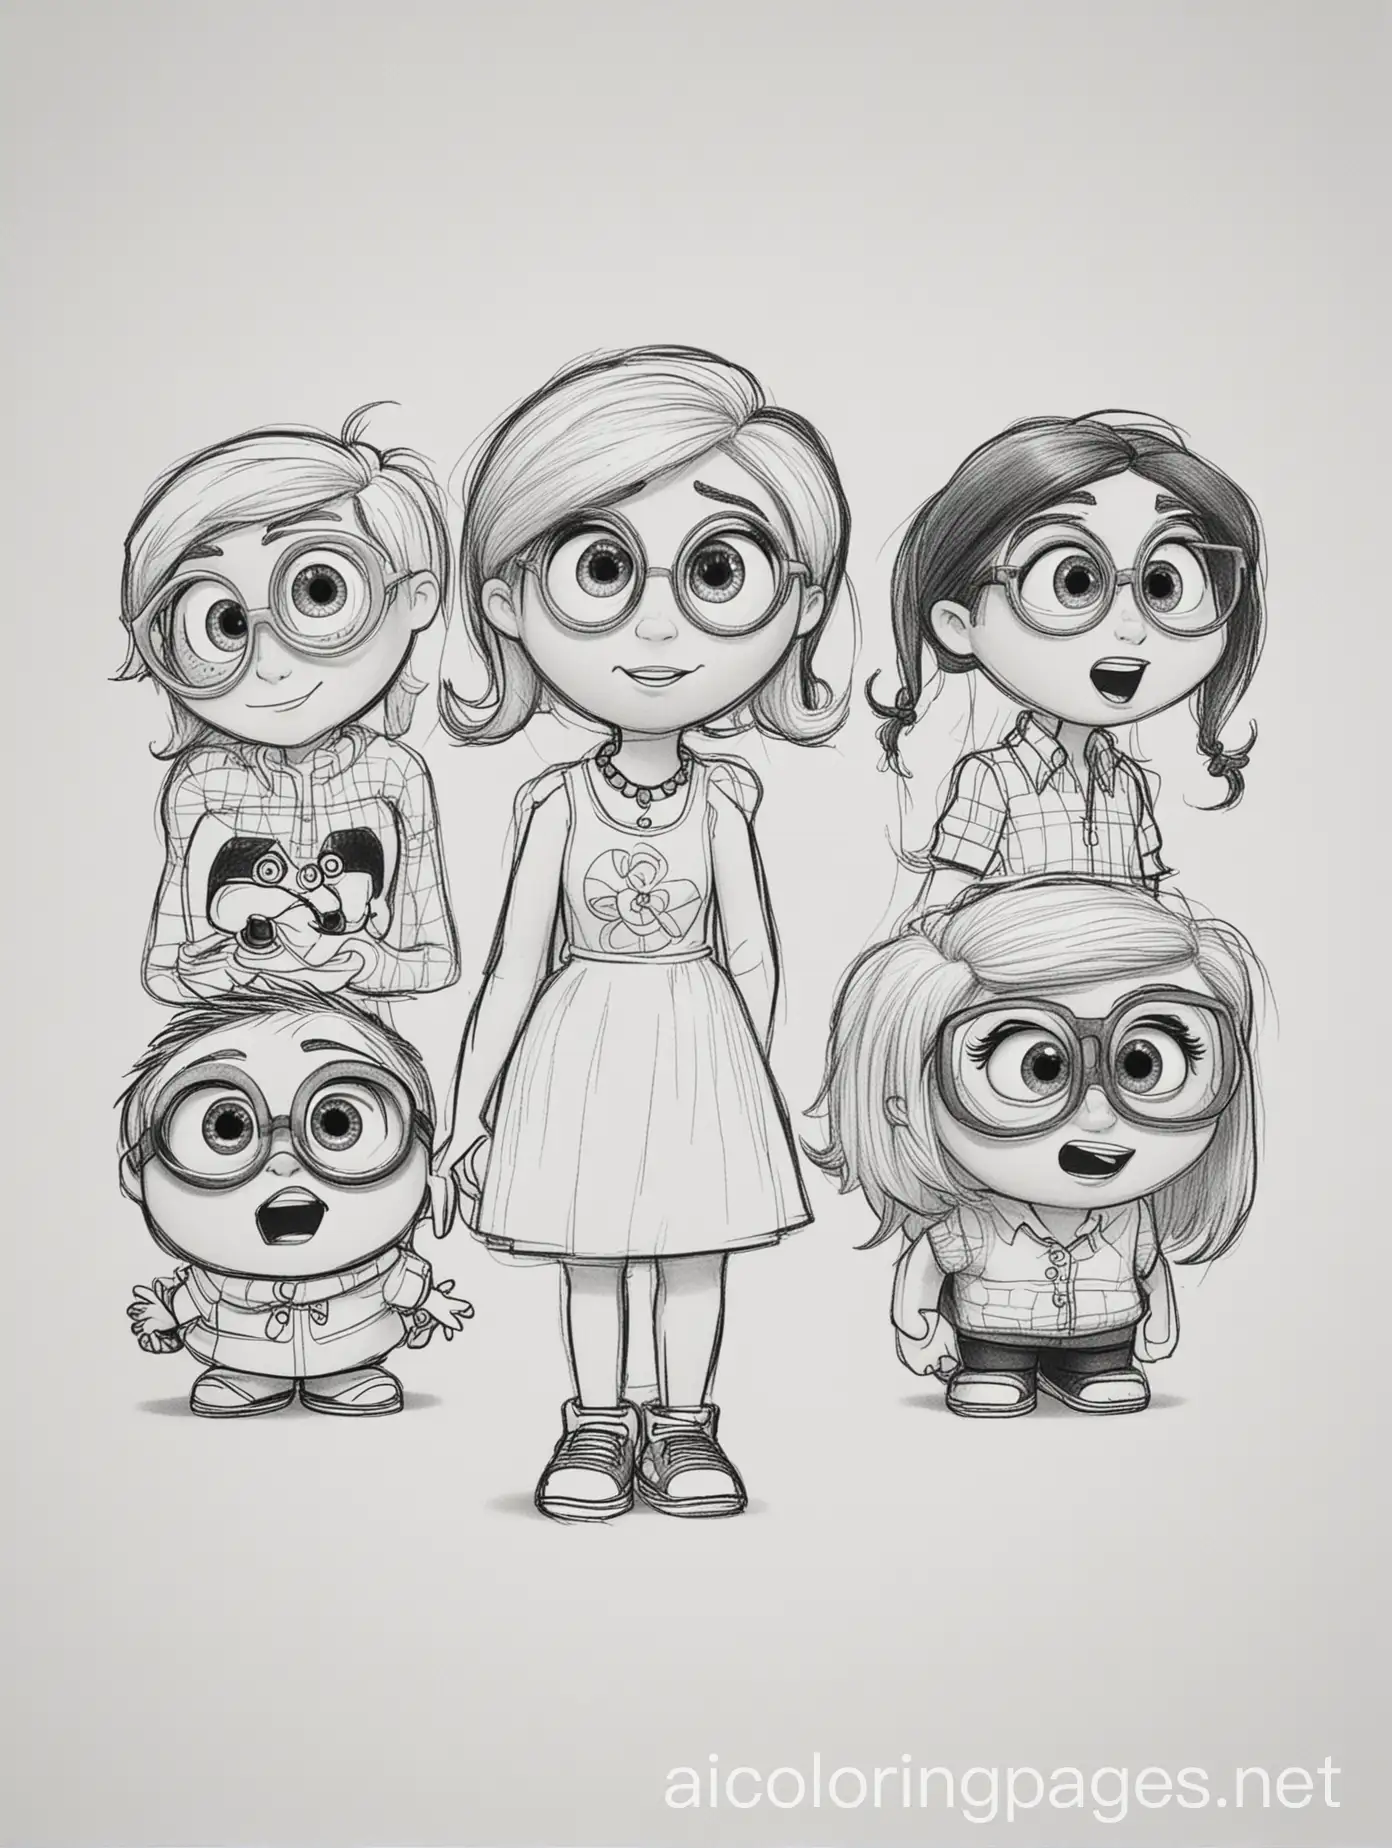 pixar inside out characters, Coloring Page, black and white, line art, white background, Simplicity, Ample White Space. The background of the coloring page is plain white to make it easy for young children to color within the lines. The outlines of all the subjects are easy to distinguish, making it simple for kids to color without too much difficulty